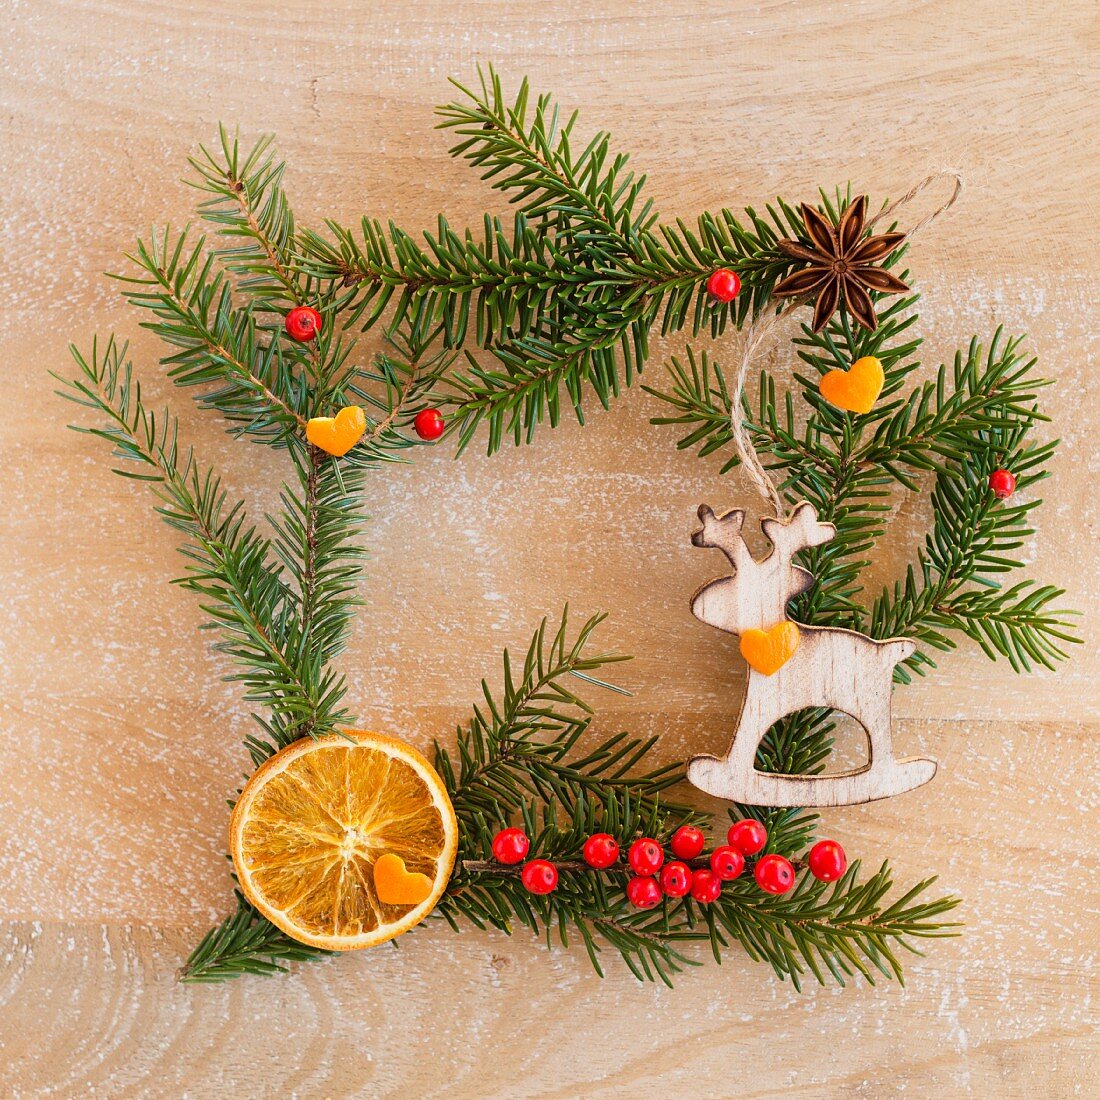 Square frame of fir twigs and decorations on wooden surface